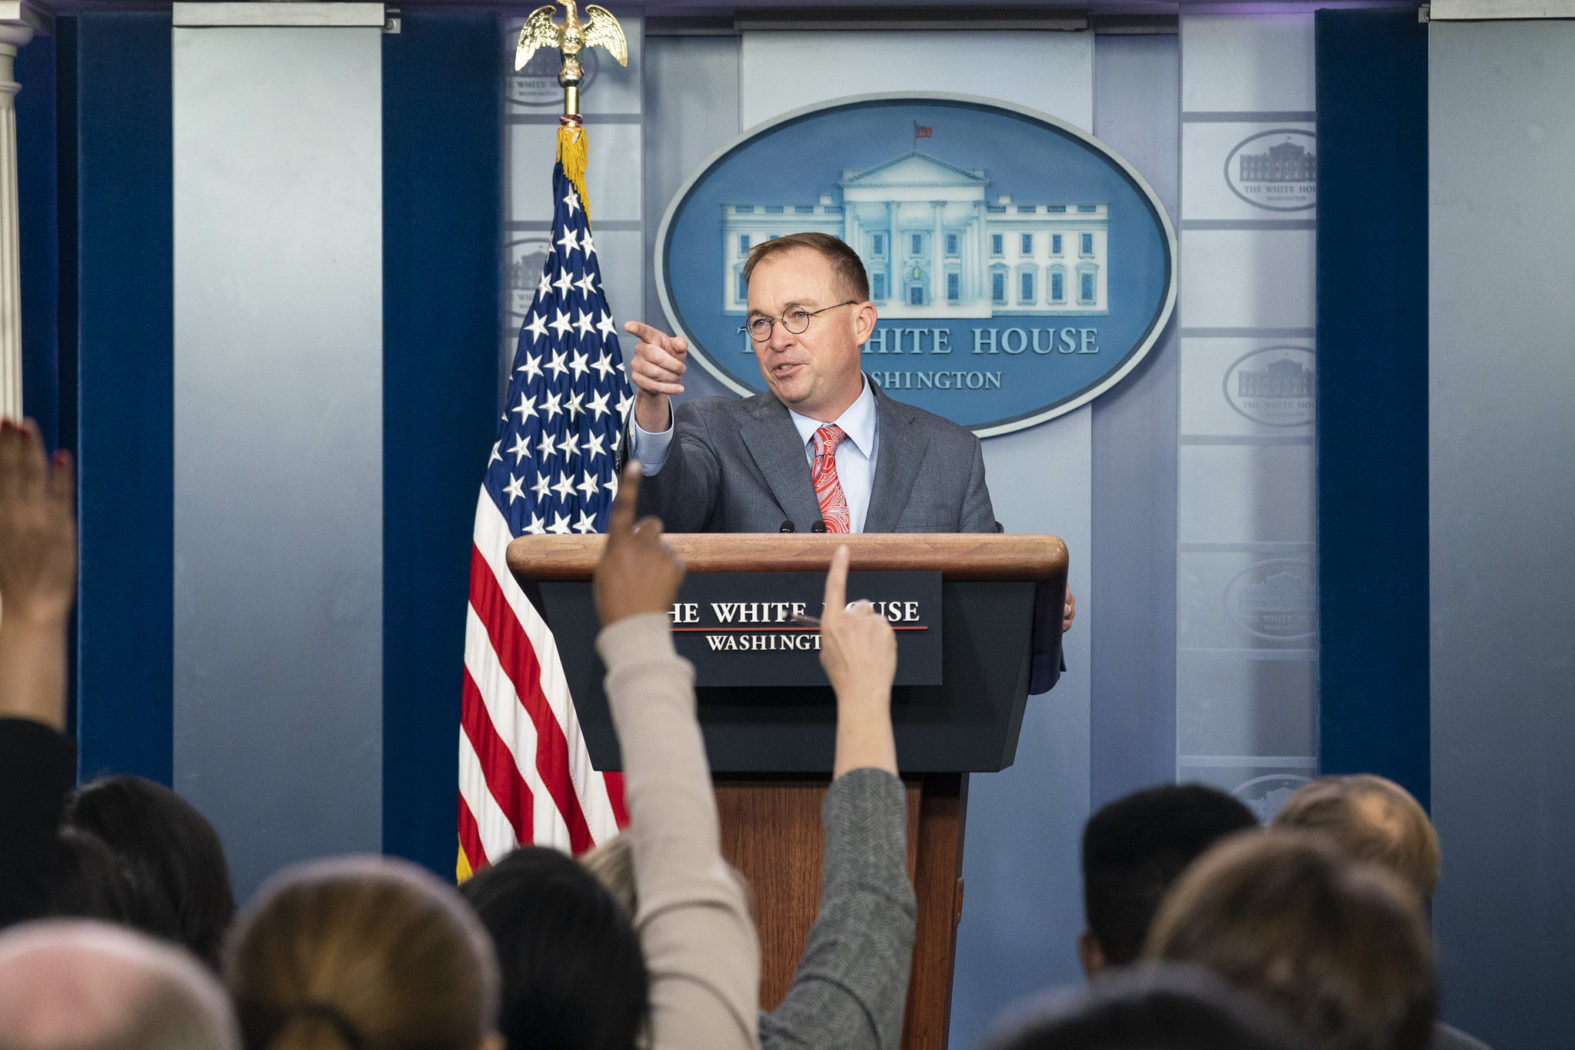 Mick Mulvaney calls on a reporter at a press conference